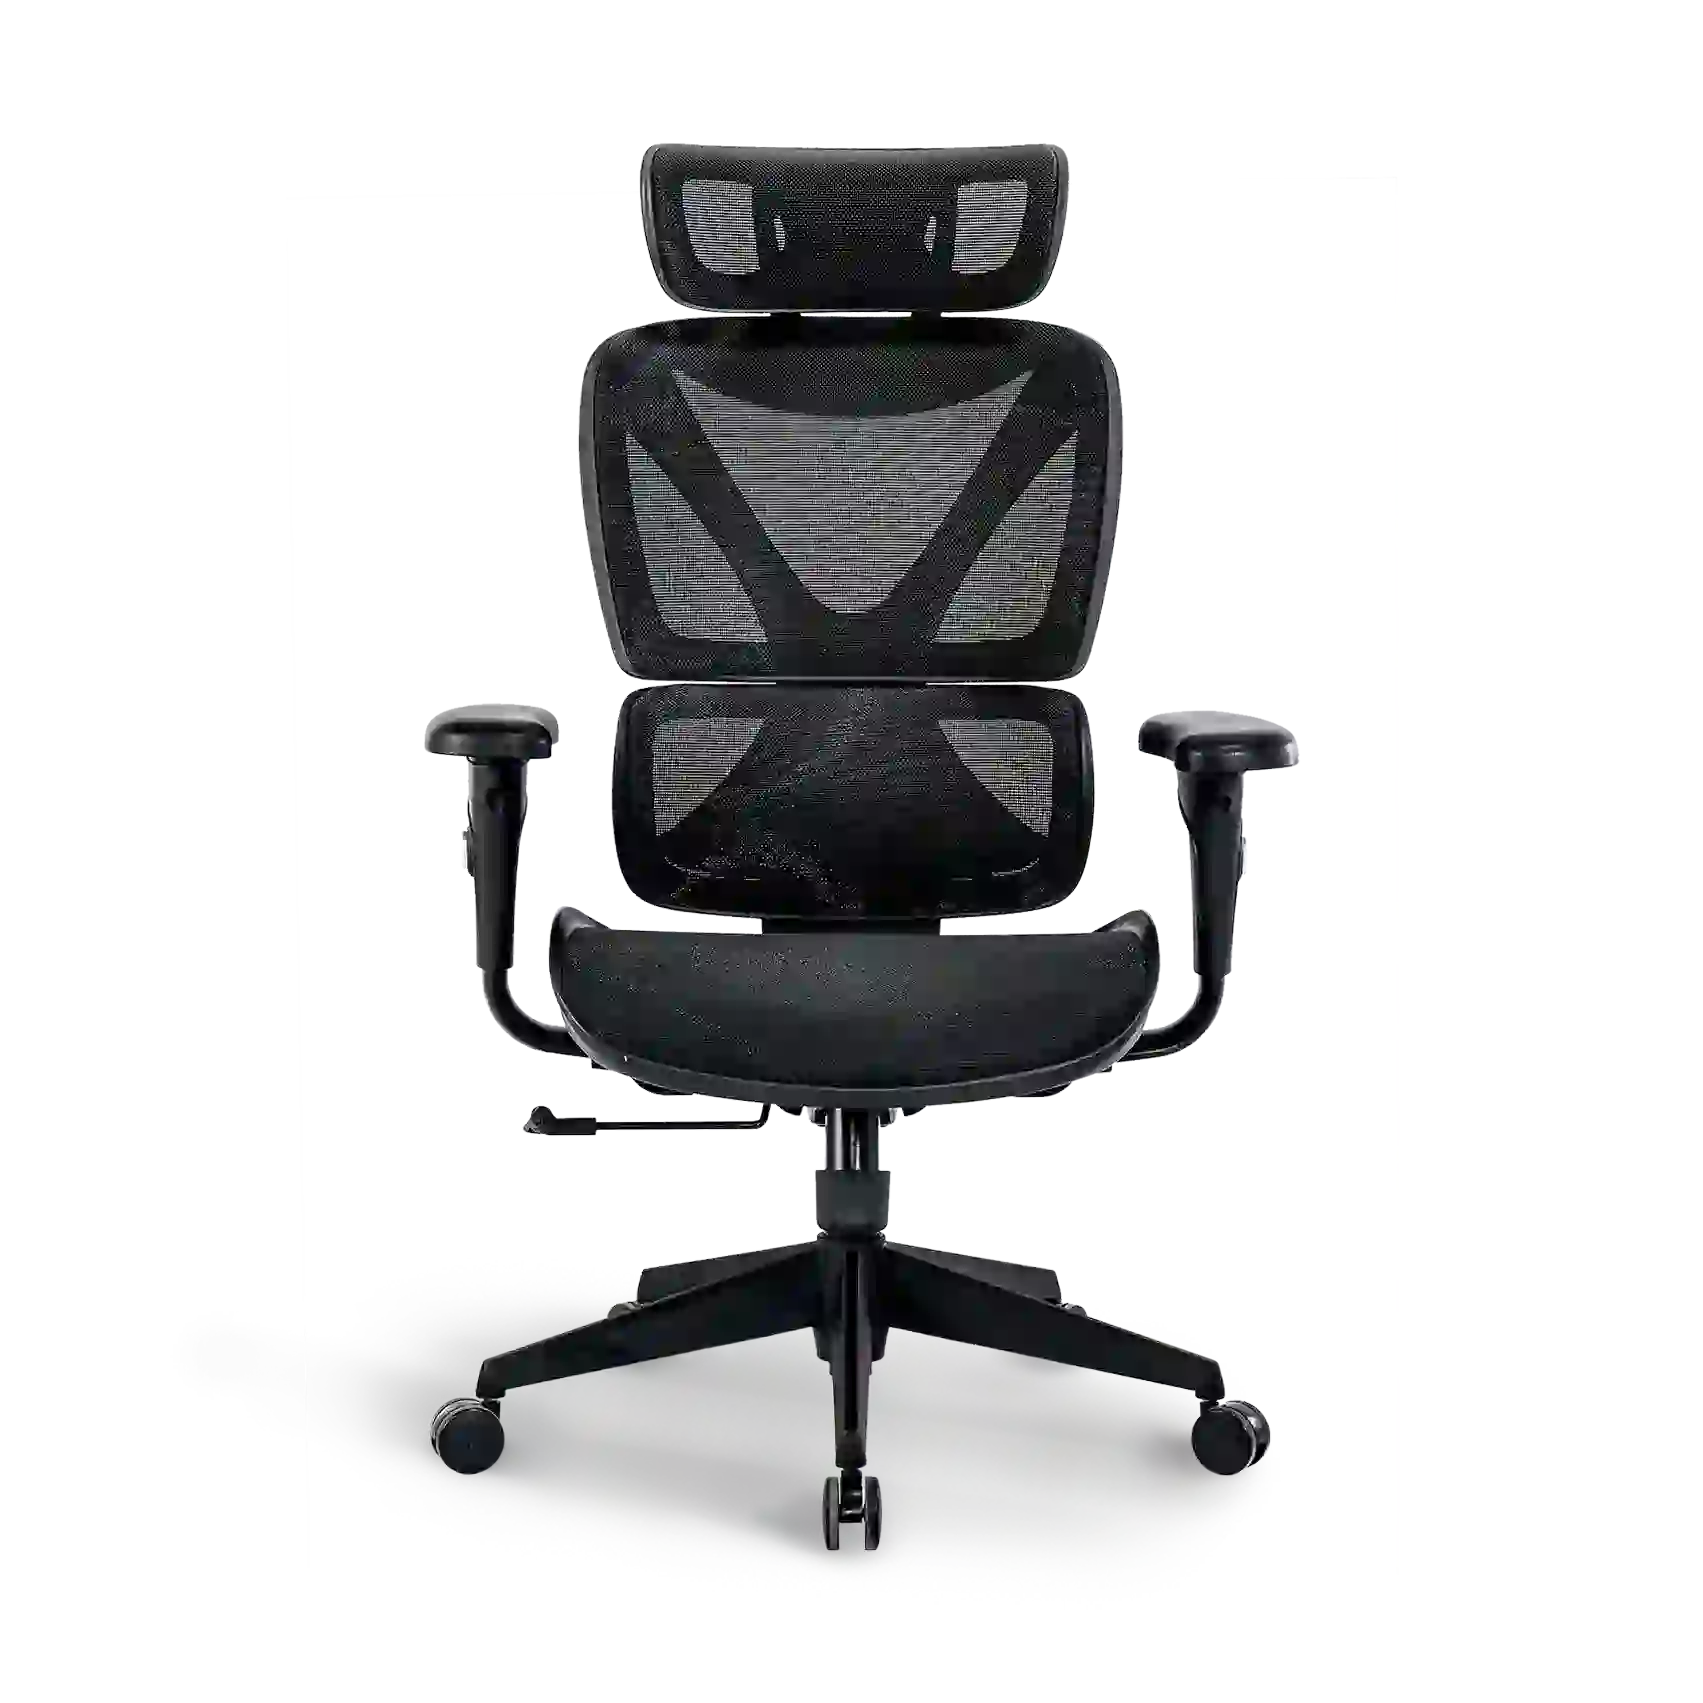 Bea without Headrest Ergonomic Chair angled view with focus on the tilt mechanism and seat design.